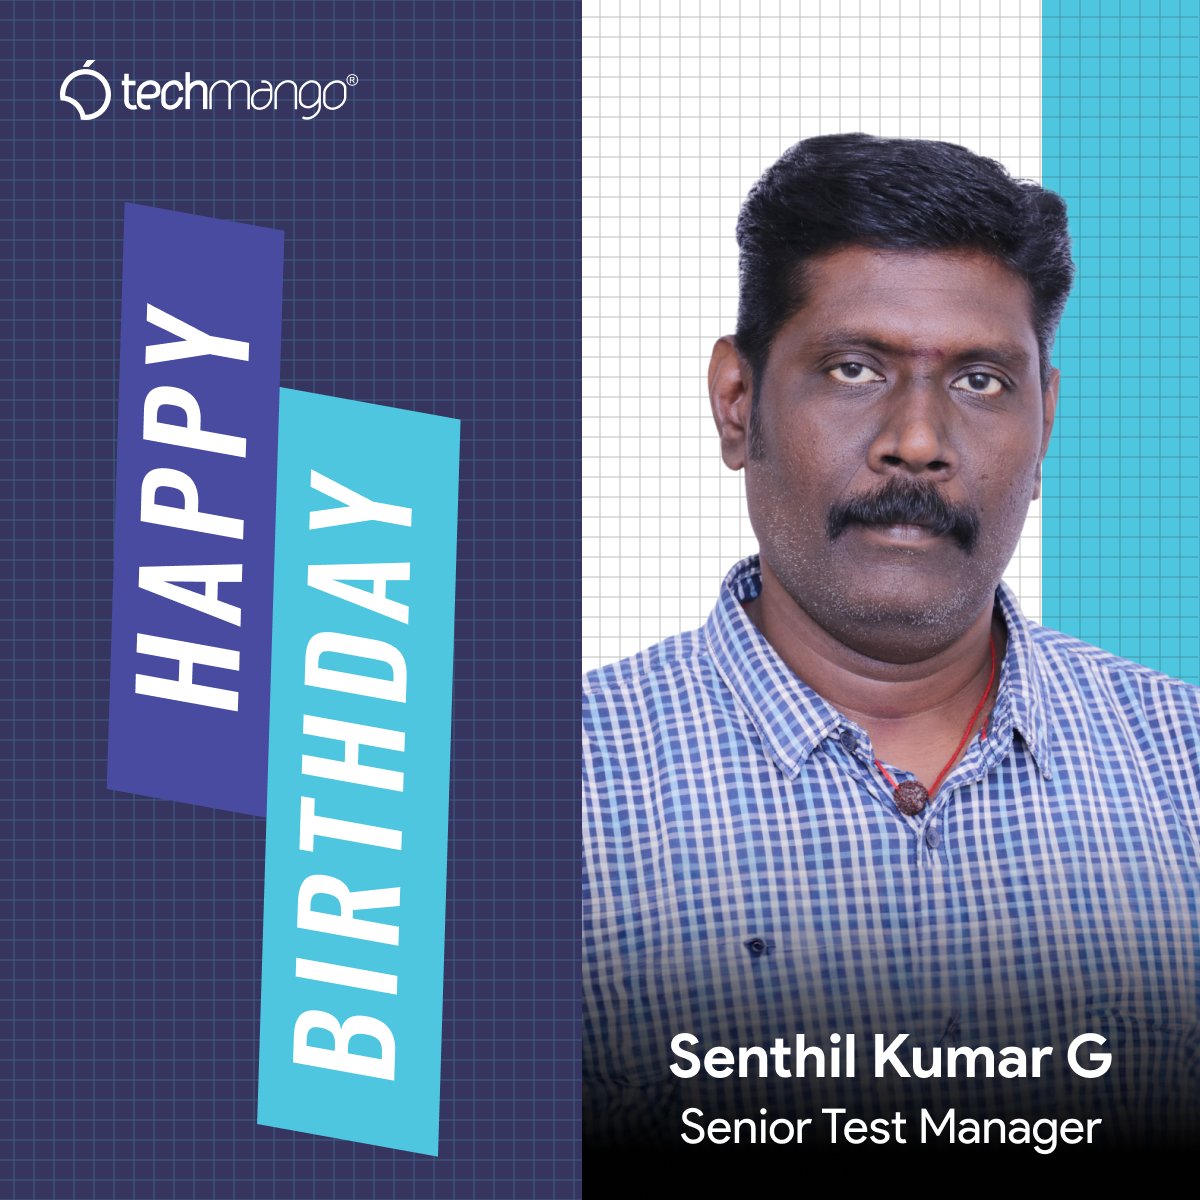 Techmango Wishes a Happy Birthday to Senthilkumar Cheers to another fantastic year ahead! May this birthday be the start of your greatest, most wonderful journey yet. Have a fantastic day! #happybirthday #birthdaywishes #birthdaycelebration #birthdayparty #birthdaycheers